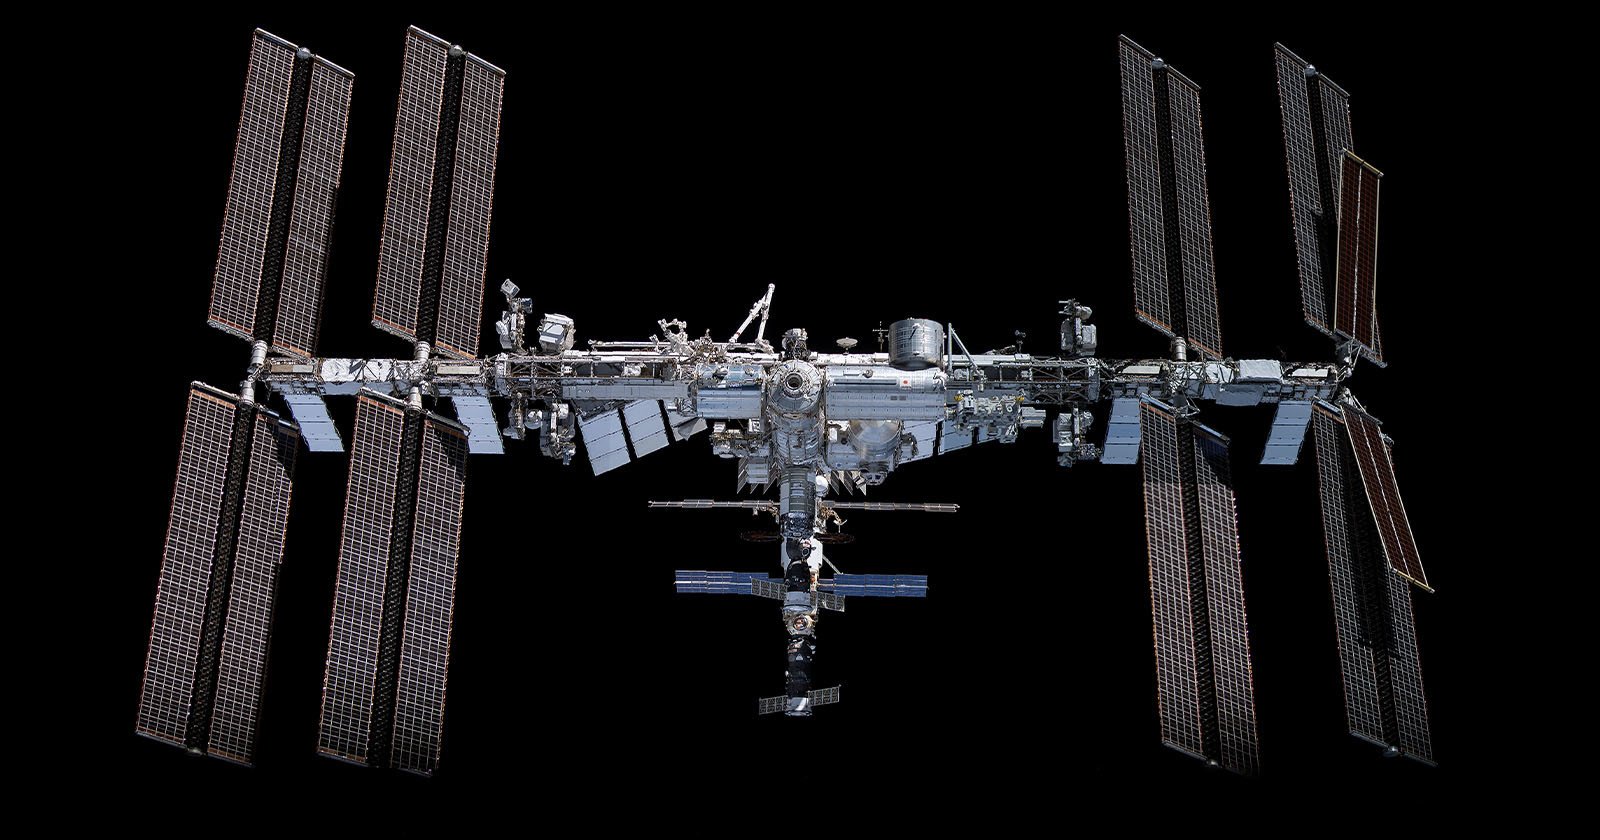  iss about receive its highest resolution camera 